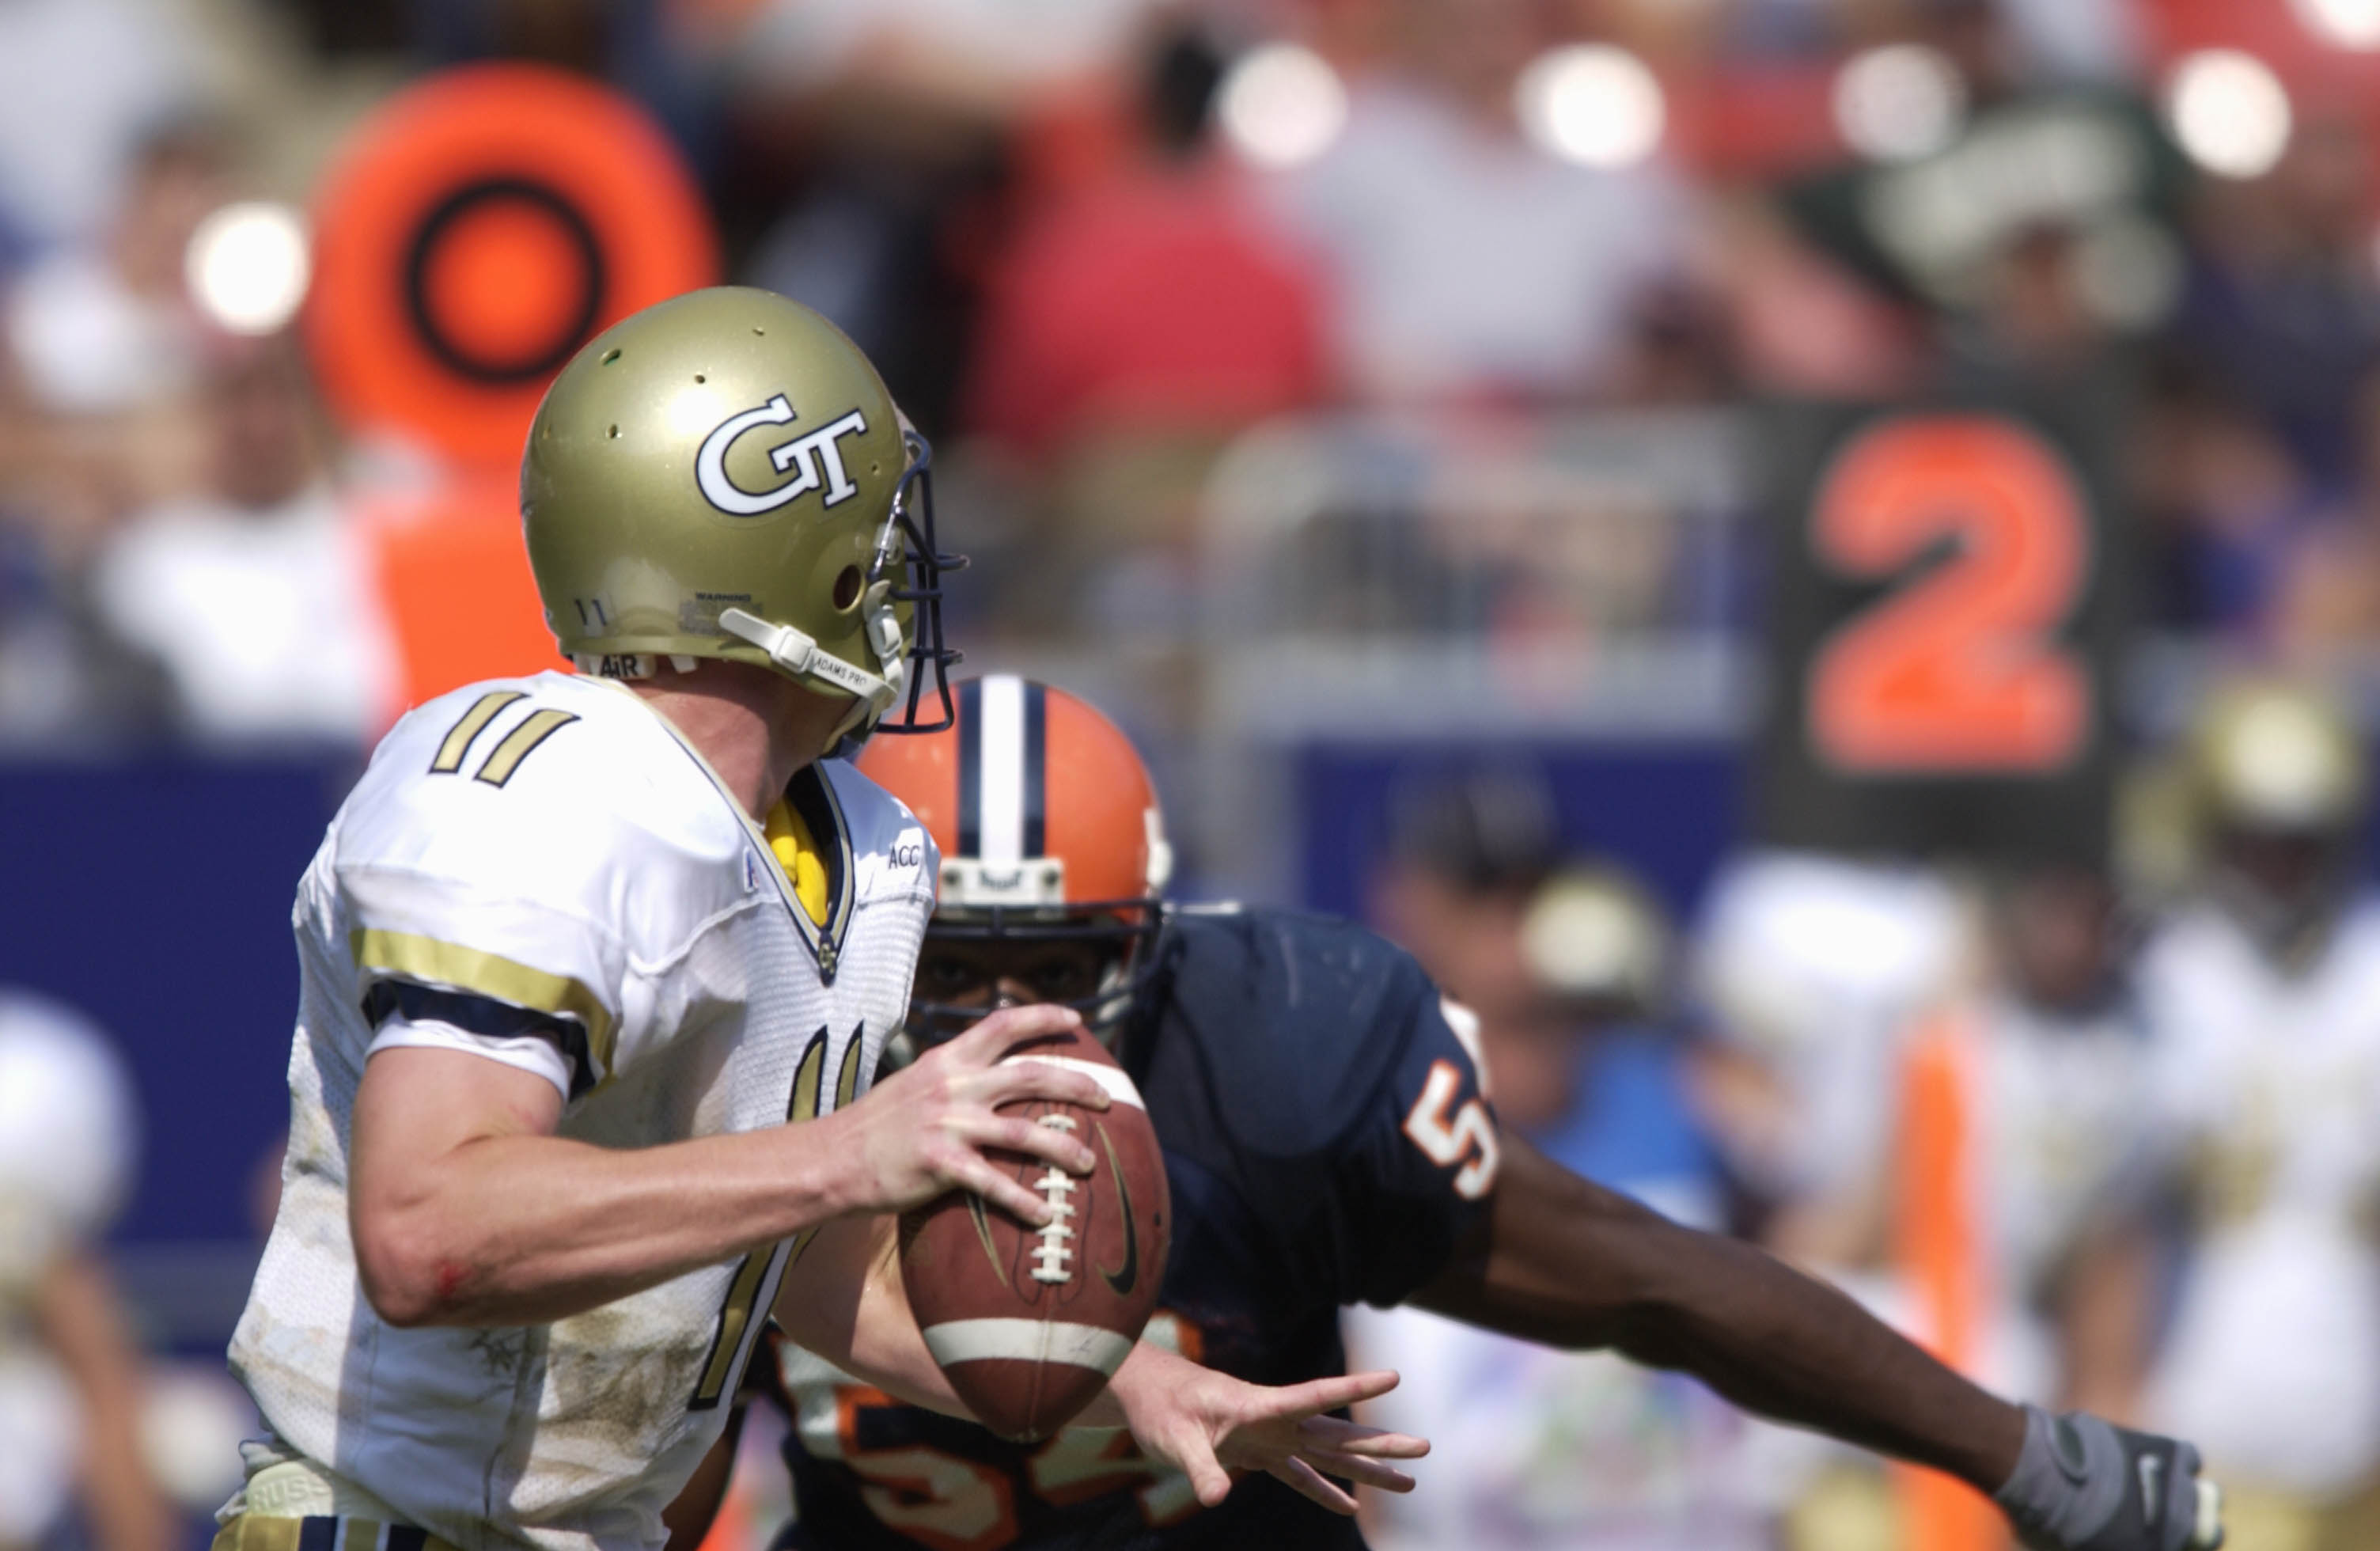 26 Aug 2001: Quarterback George Godsey #11 of Georgia Tech looks to pass as defensive end Dwight Freeney #54 closes in during the Kickoff Classic against Syracuse at Giants Stadium in East Rutherford, New Jersey.   Georgia Tech won 13-7.  DIGITAL IMAGE Ma